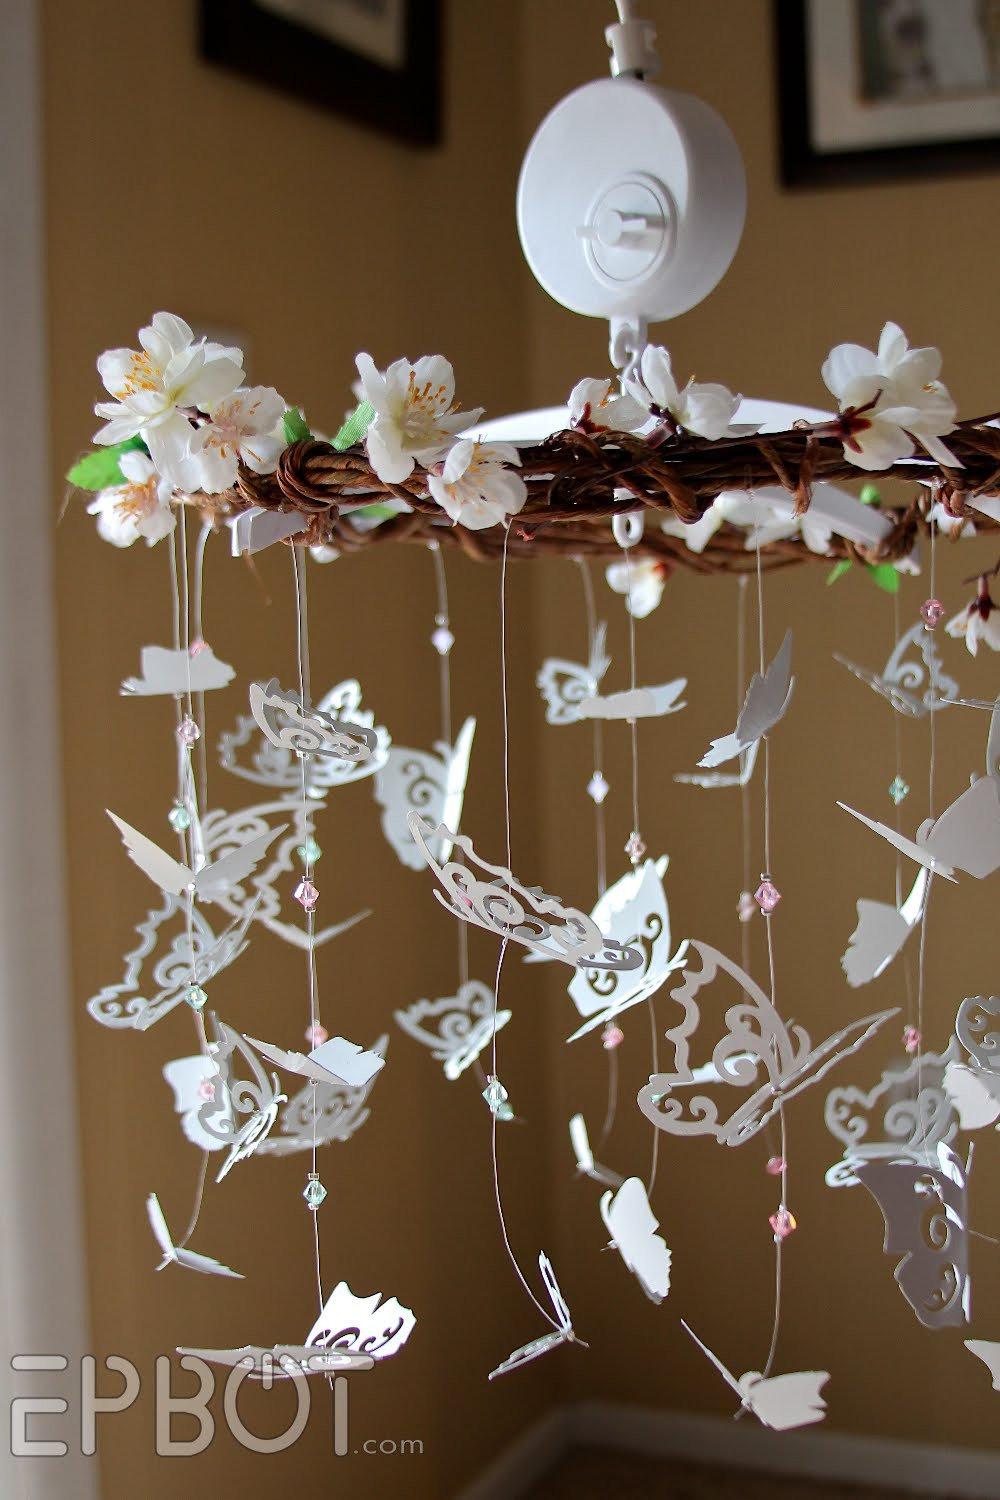 Best ideas about DIY Baby Mobile
. Save or Pin EPBOT Sweet DIY Butterfly Mobile Now.